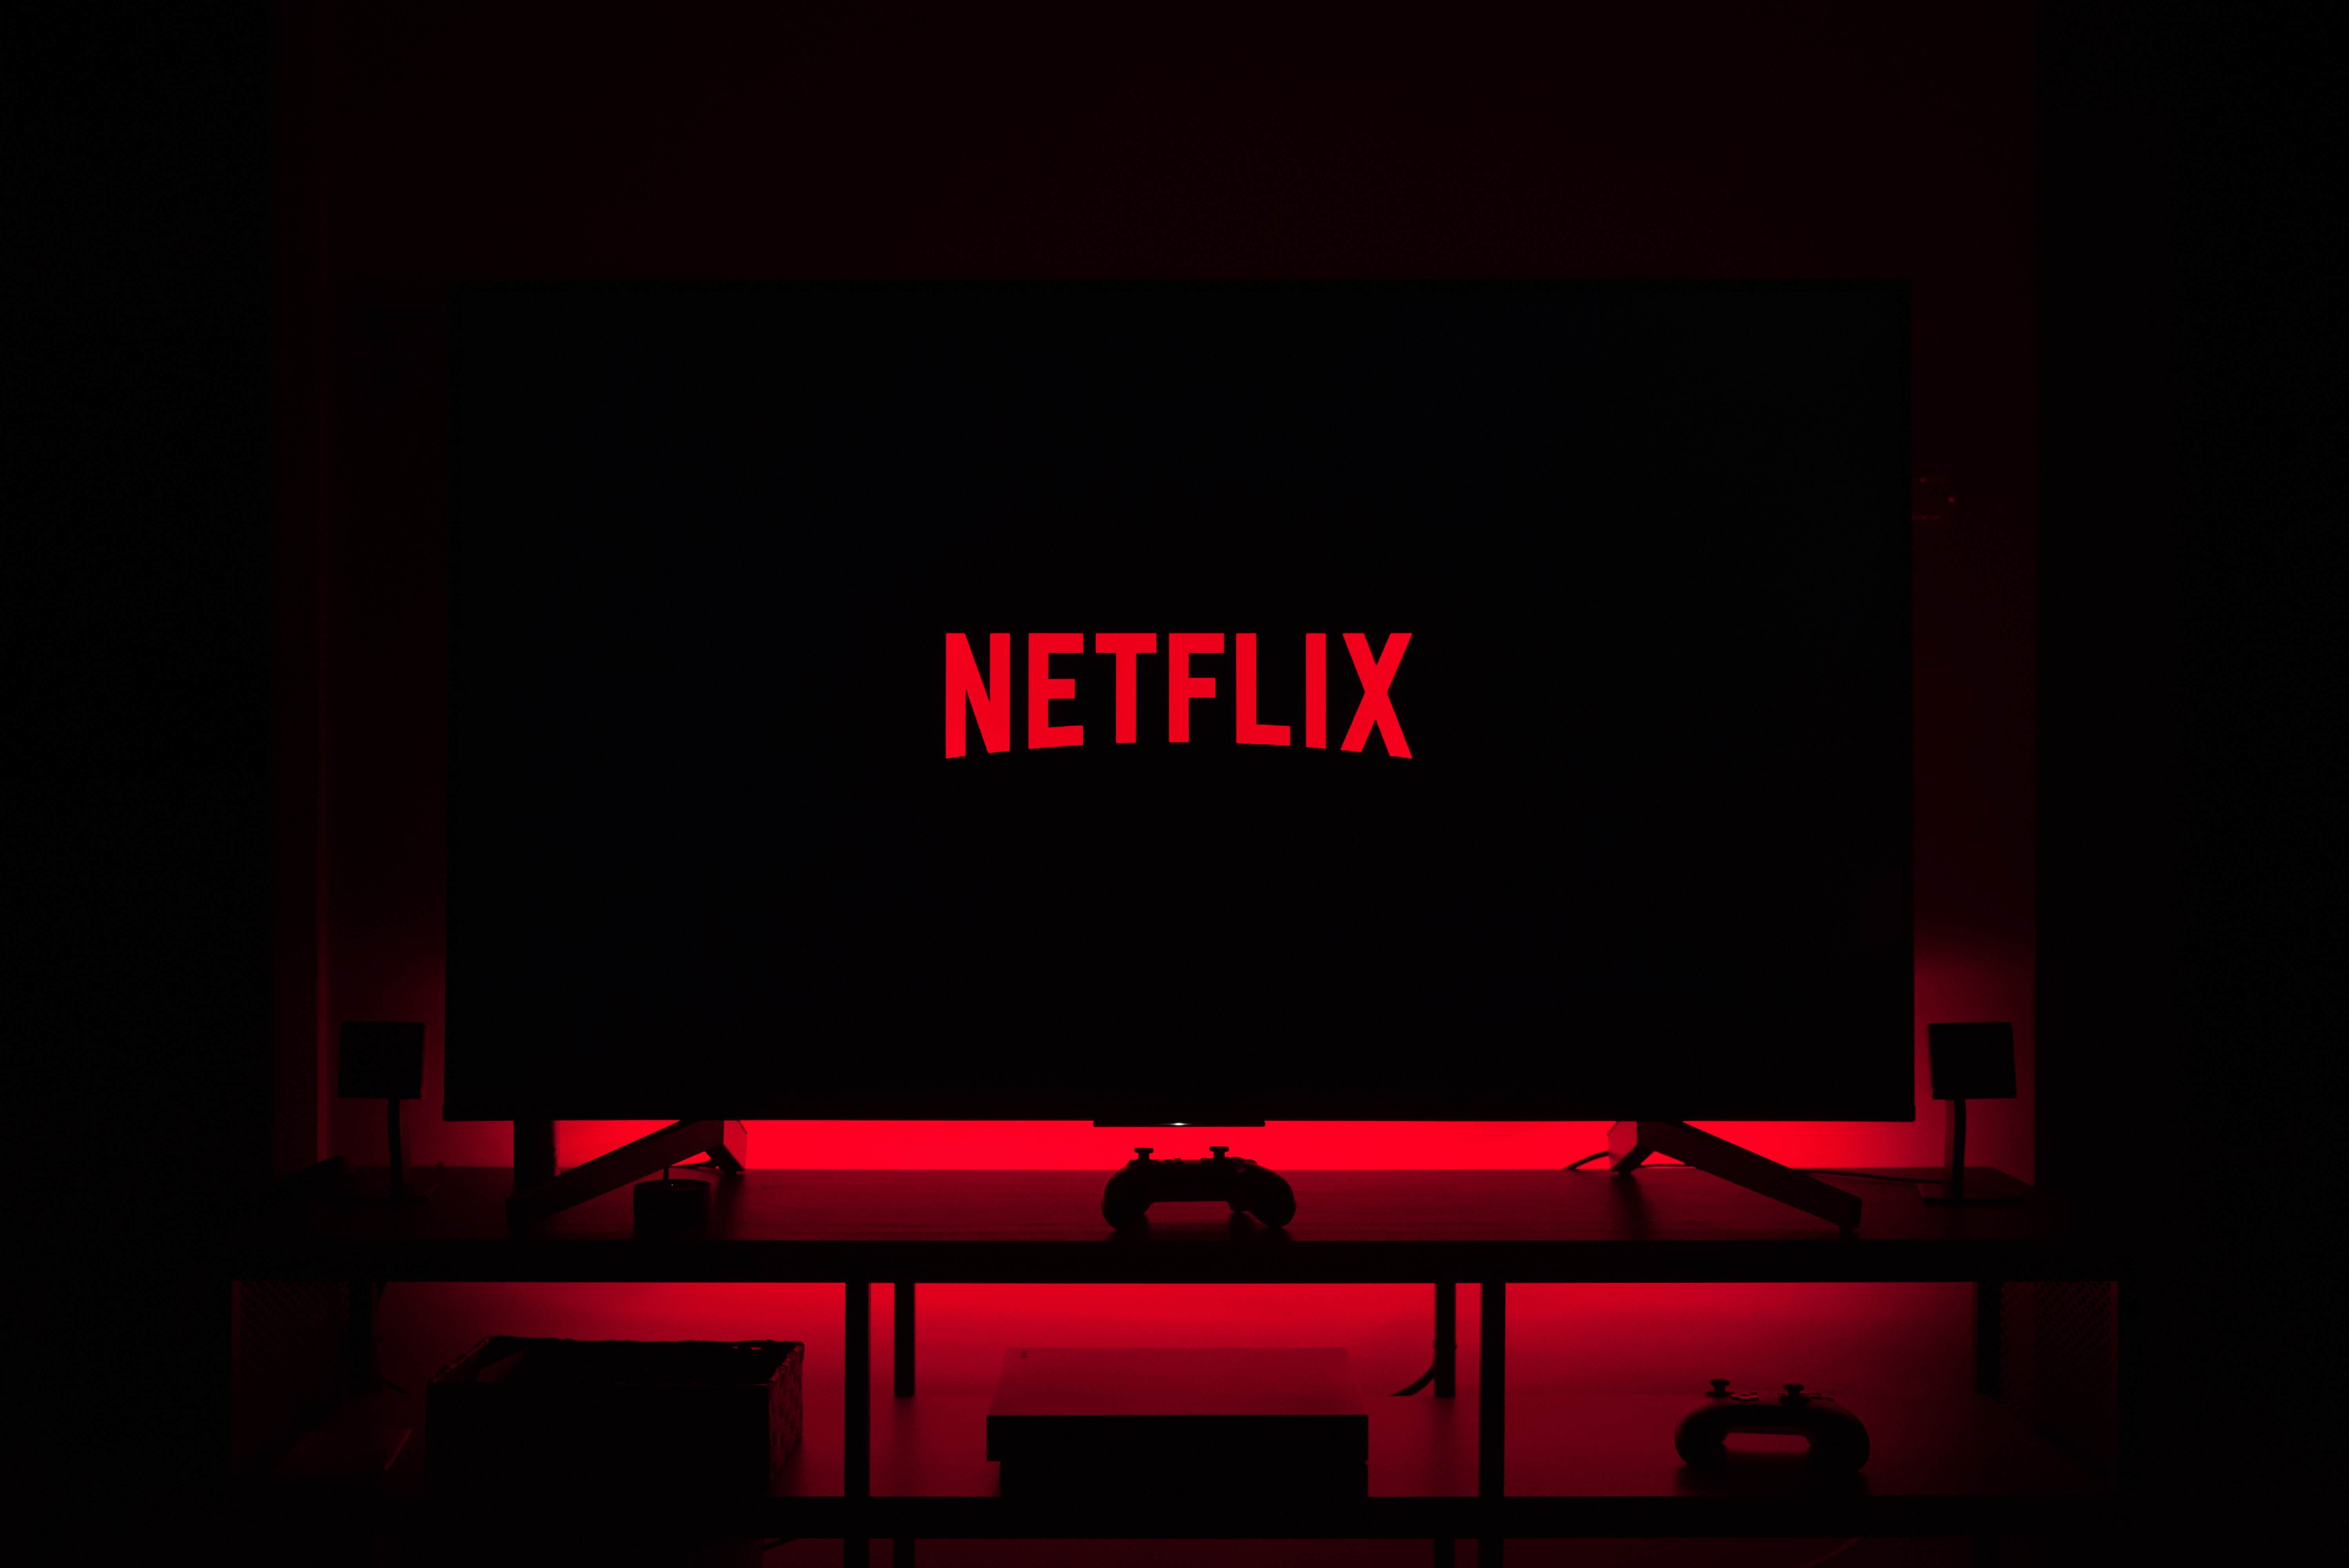 No tax and chill: Netflix’s offshore network